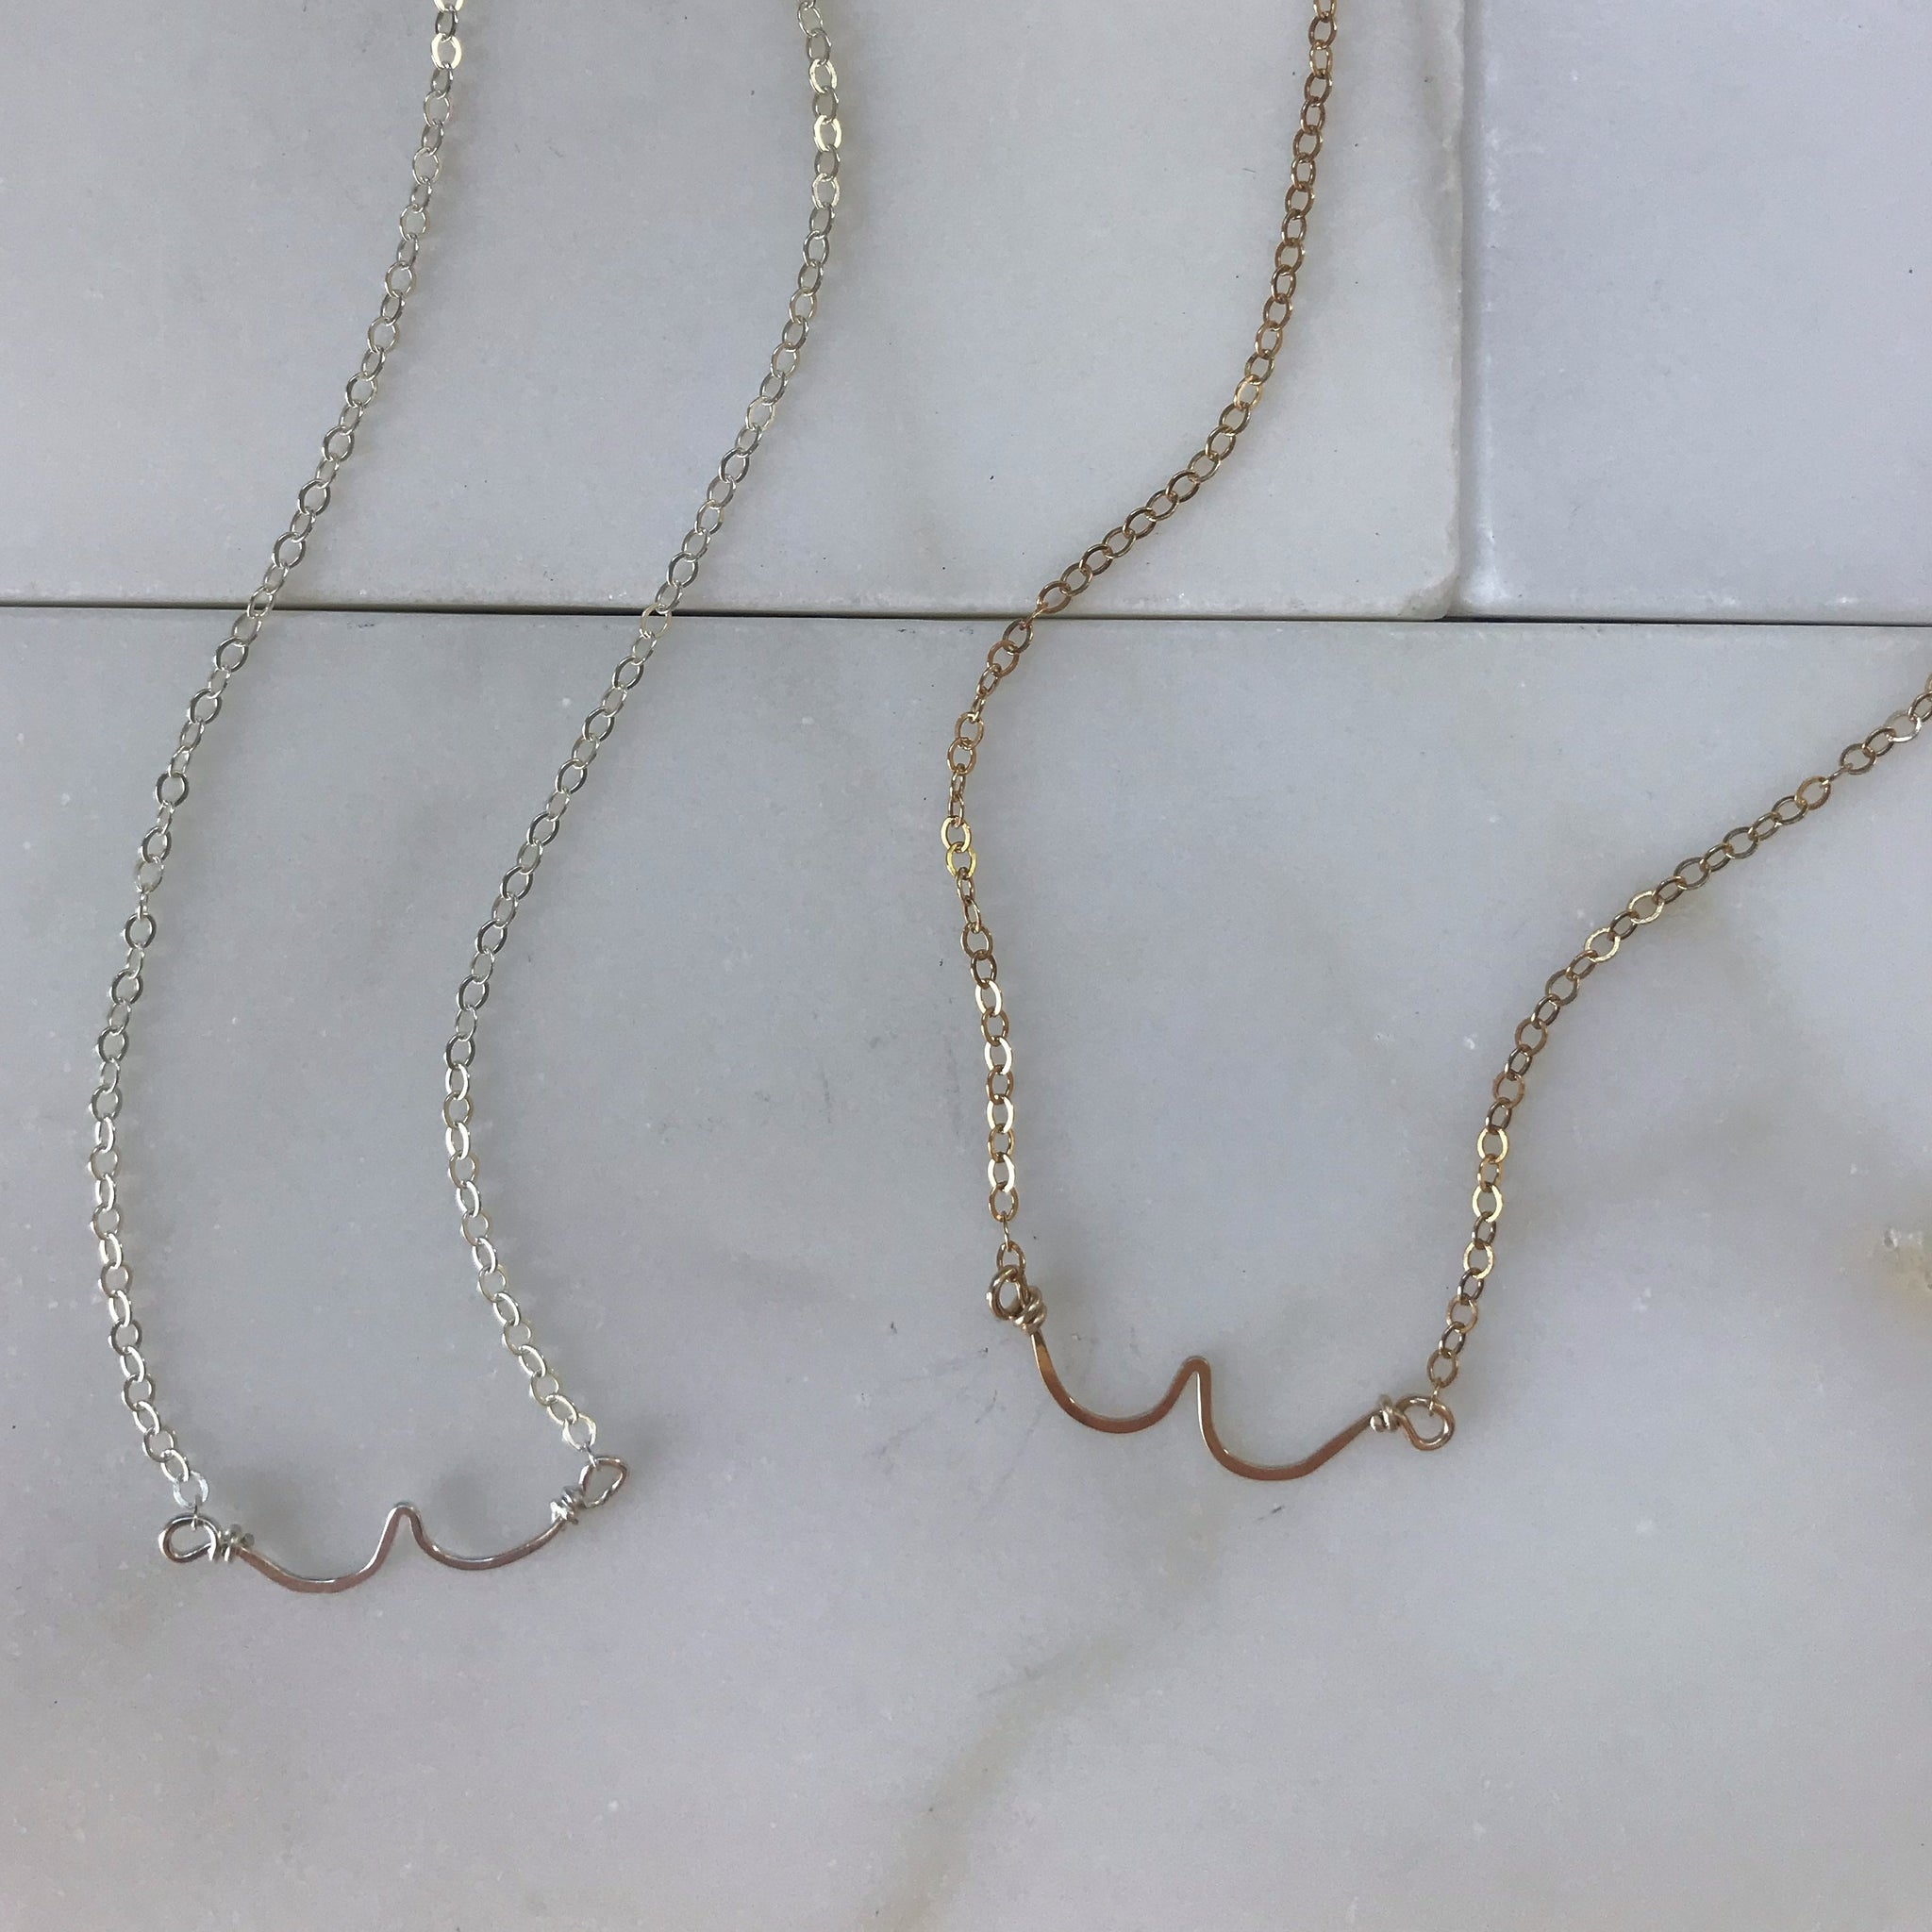 hand formed boobies necklaces in silver and gold